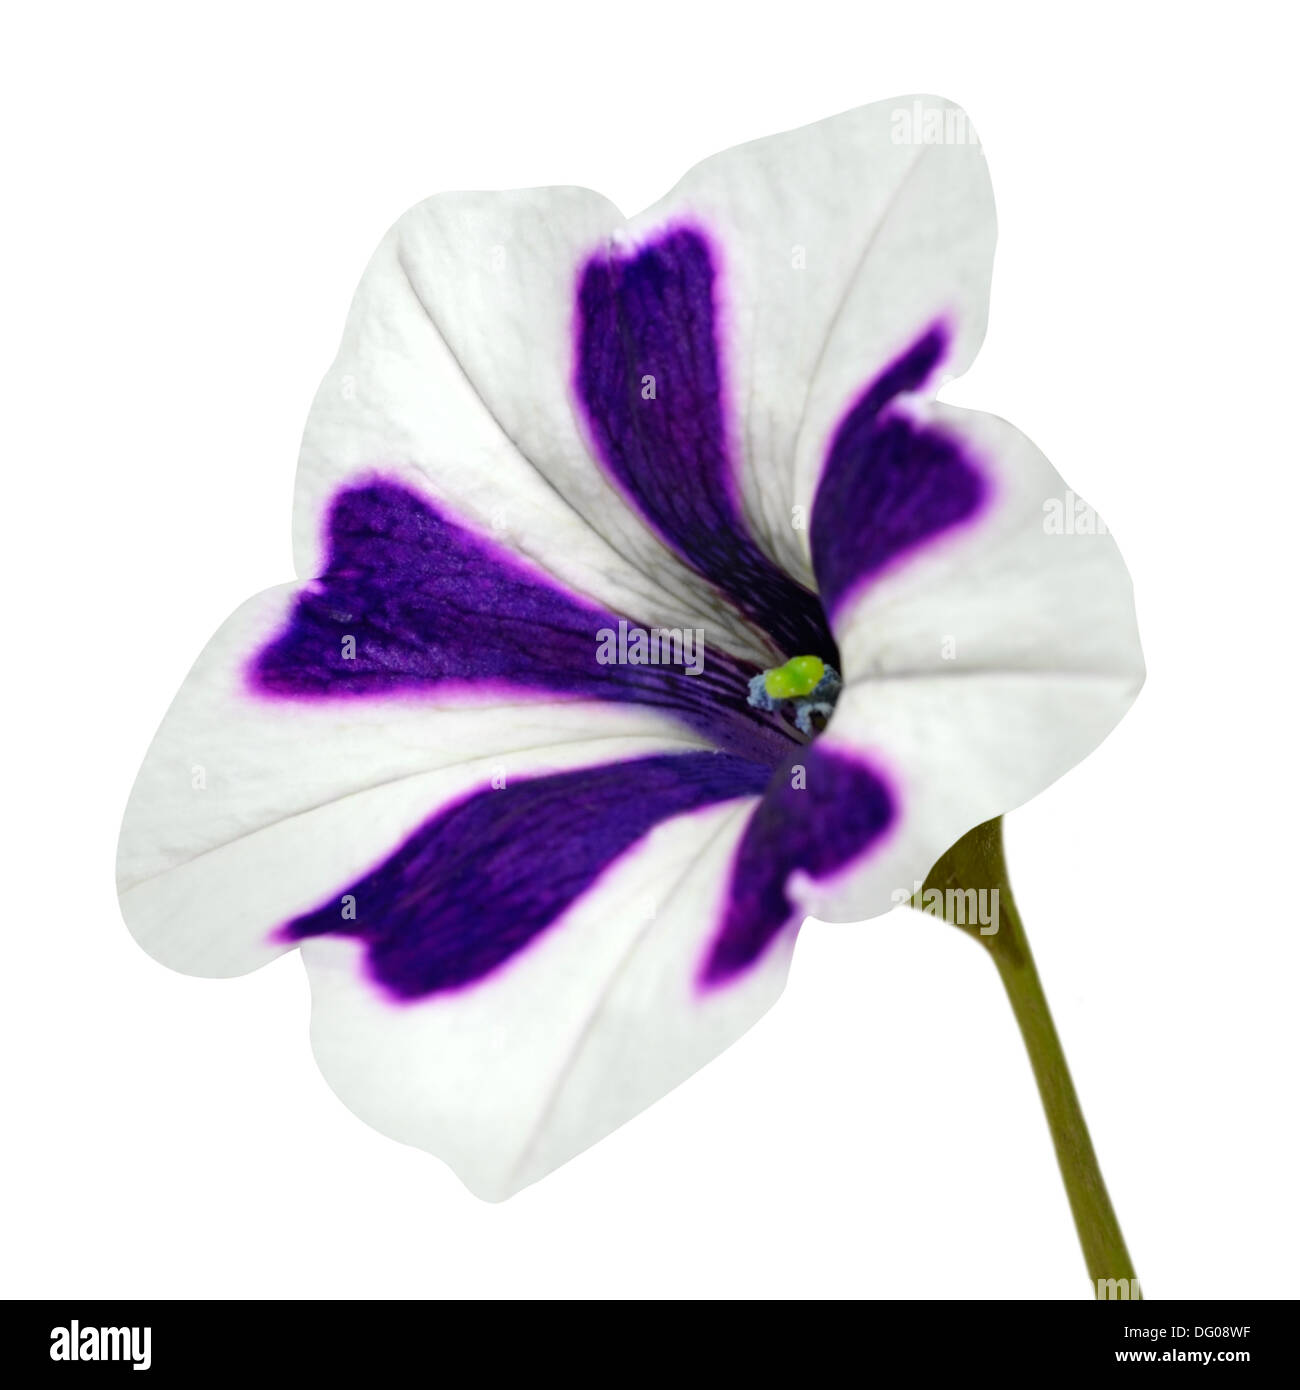 Star Shaped Morning Glory Flower with White and Purple Stripes. Isolated on White Background Stock Photo